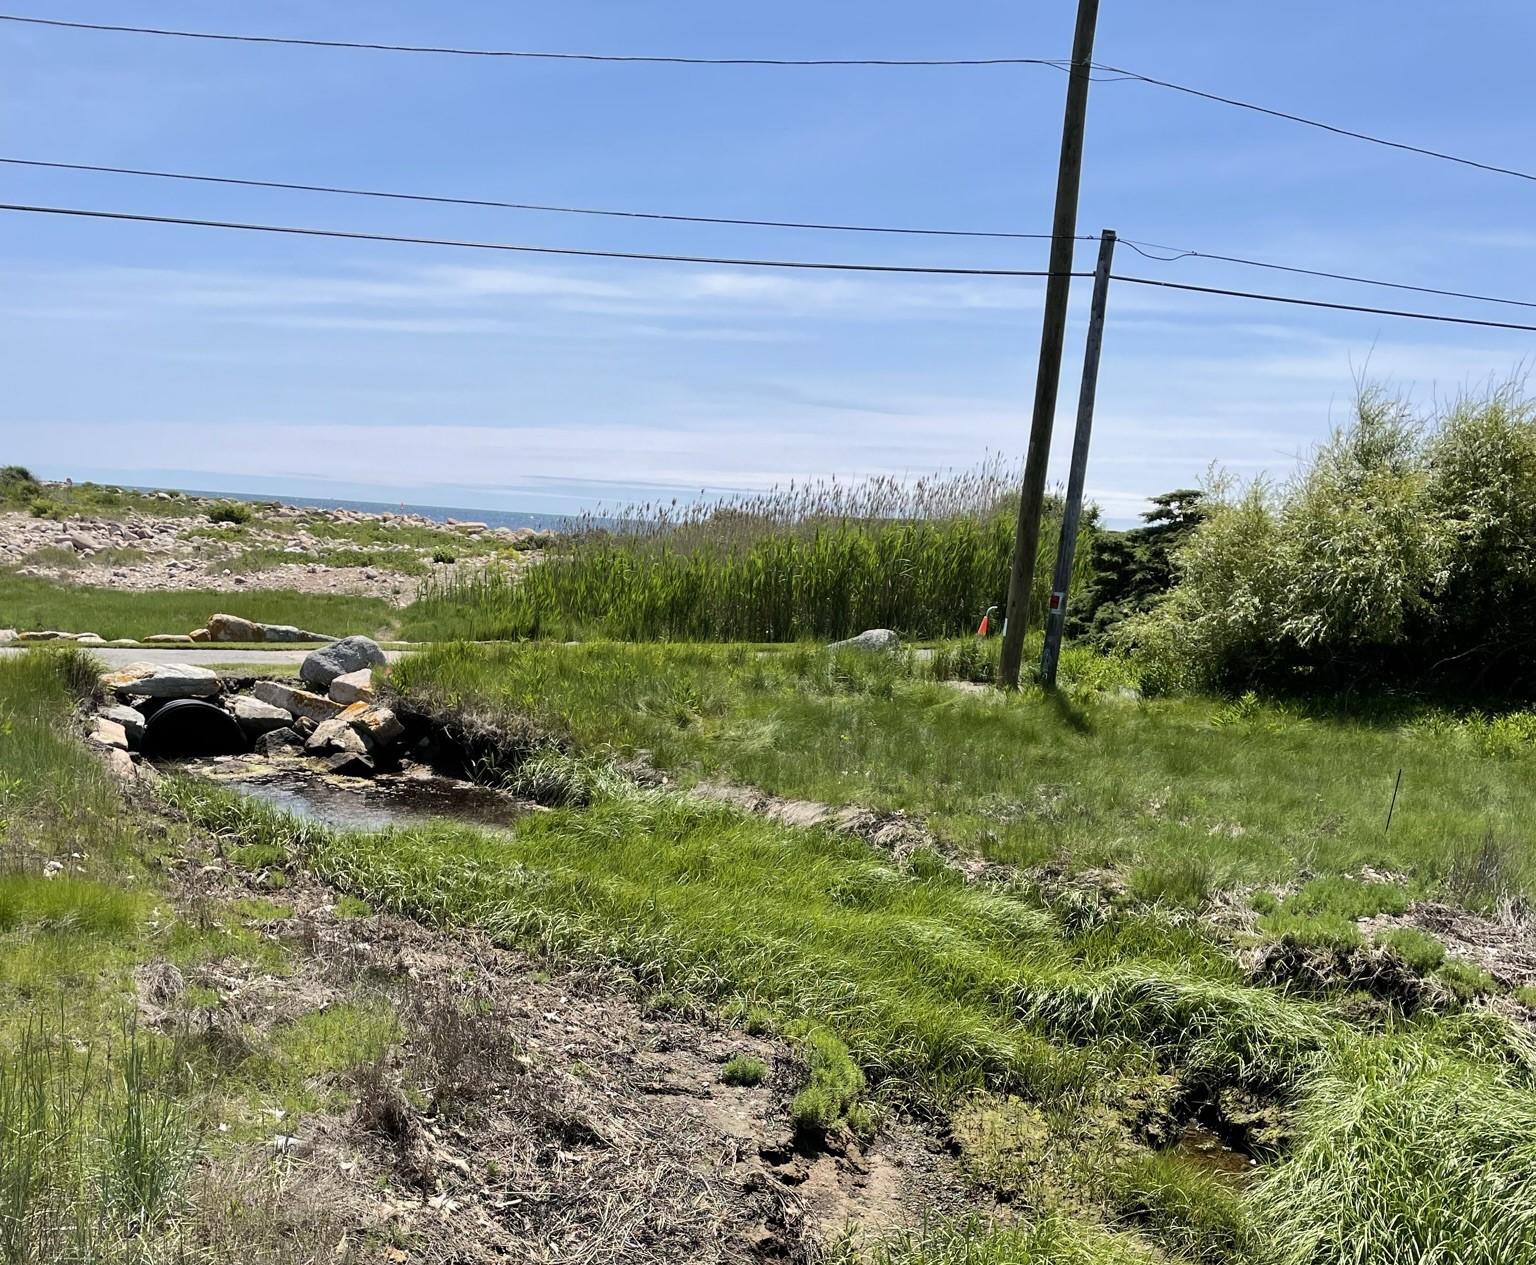 Culvert in grassy area with ocean in background.